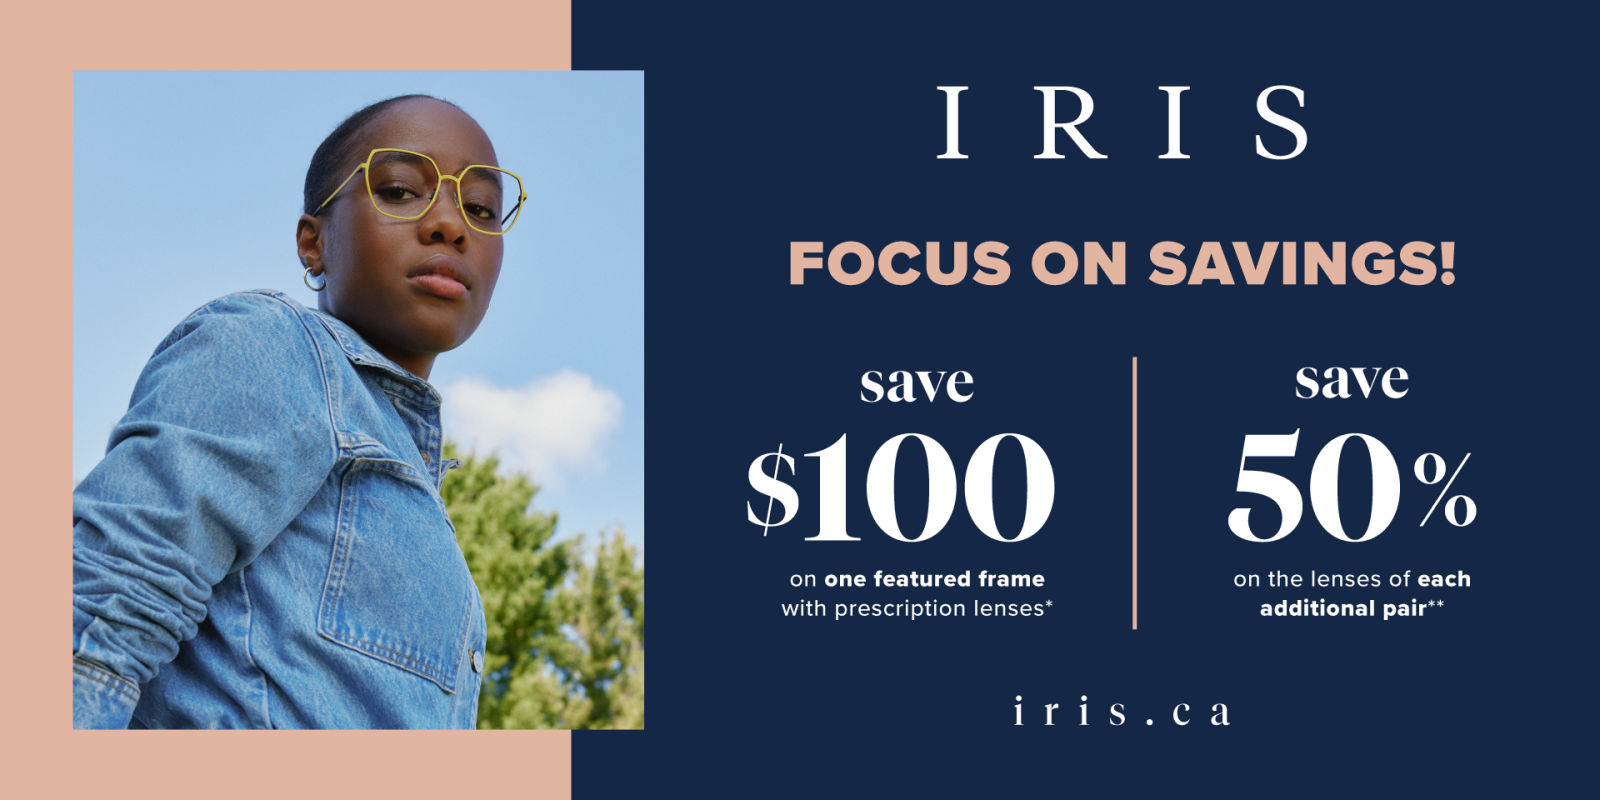 Save $100 on one featured frame*  & Save 50% on prescription lenses on each additional pair**